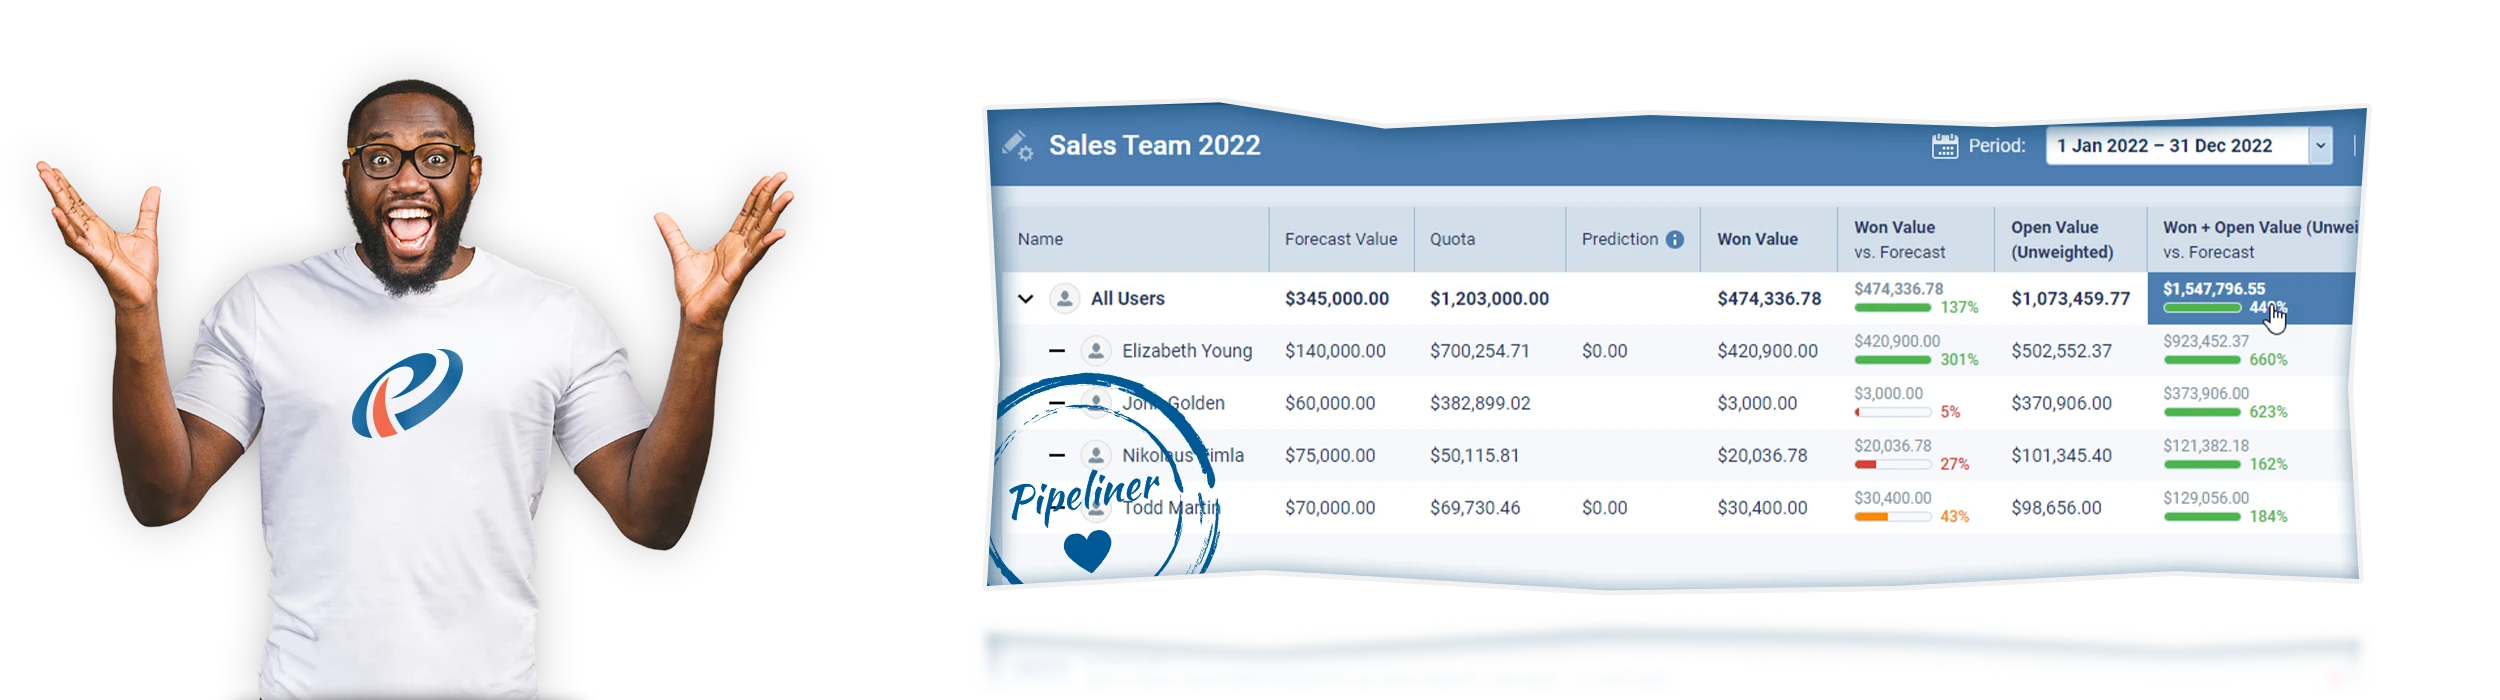 Solve sales process and challenges